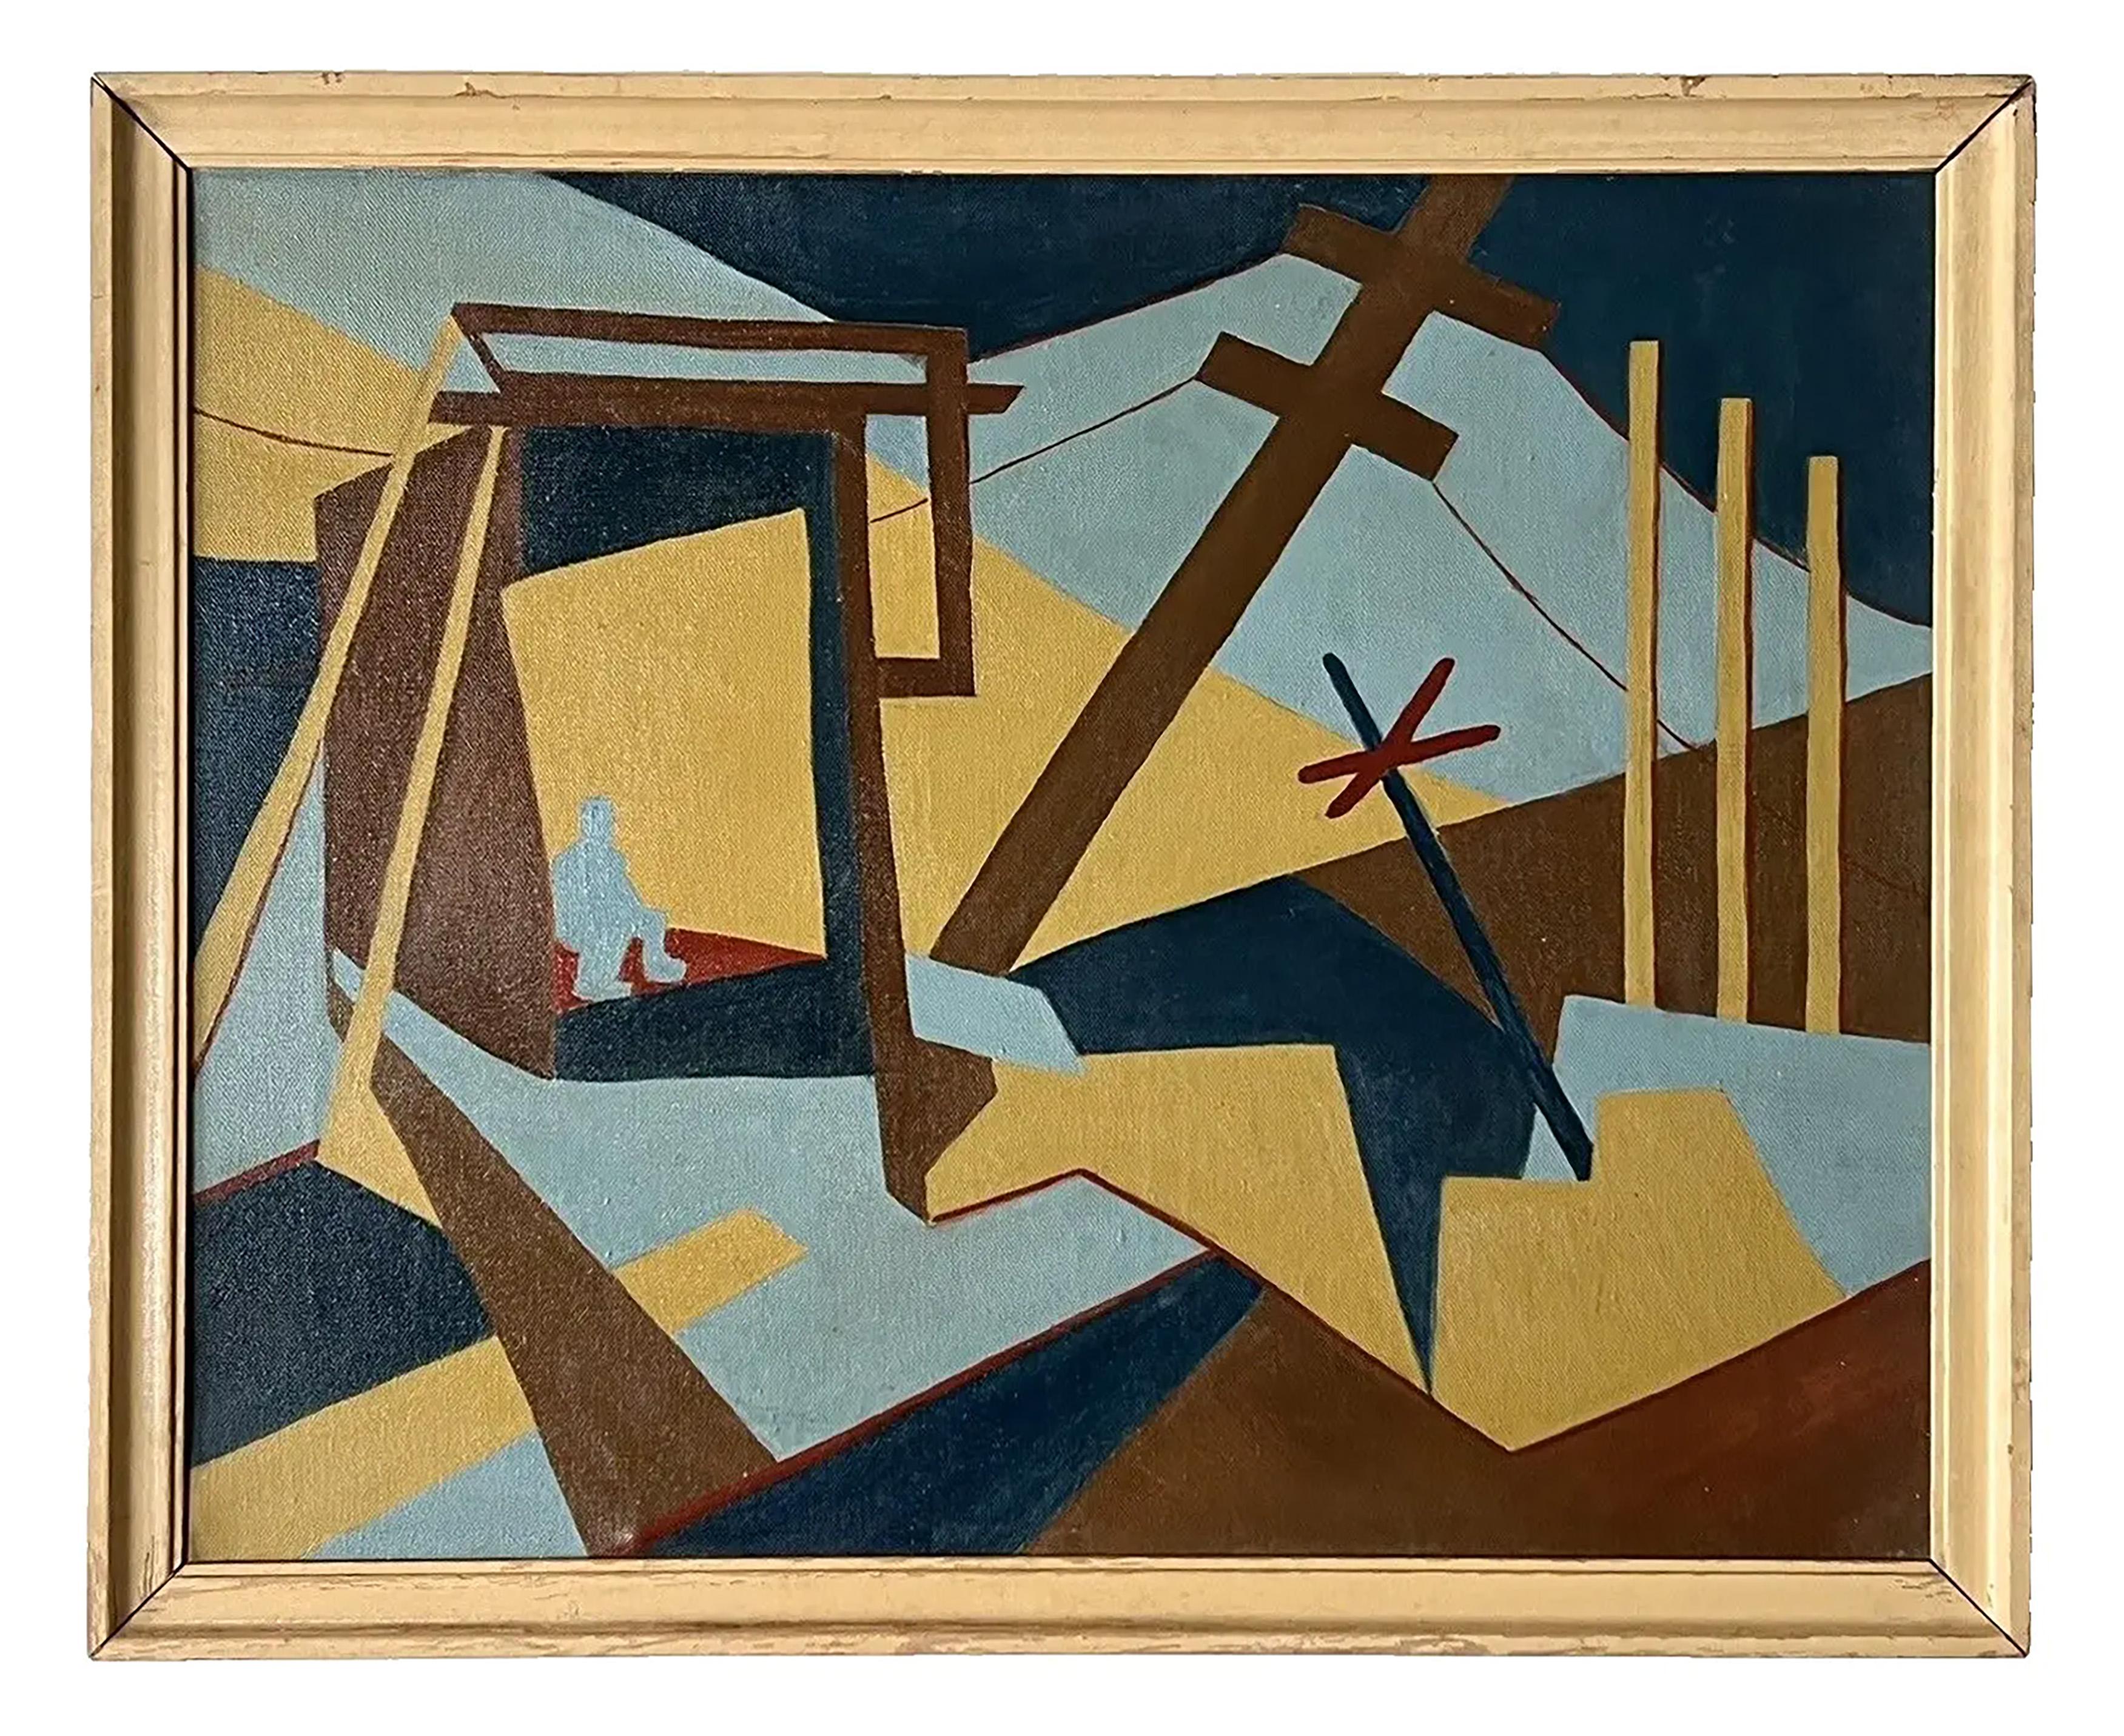 Nicely painted mid century abstract cubist oil painting.  Great color and composition.  Framed.  